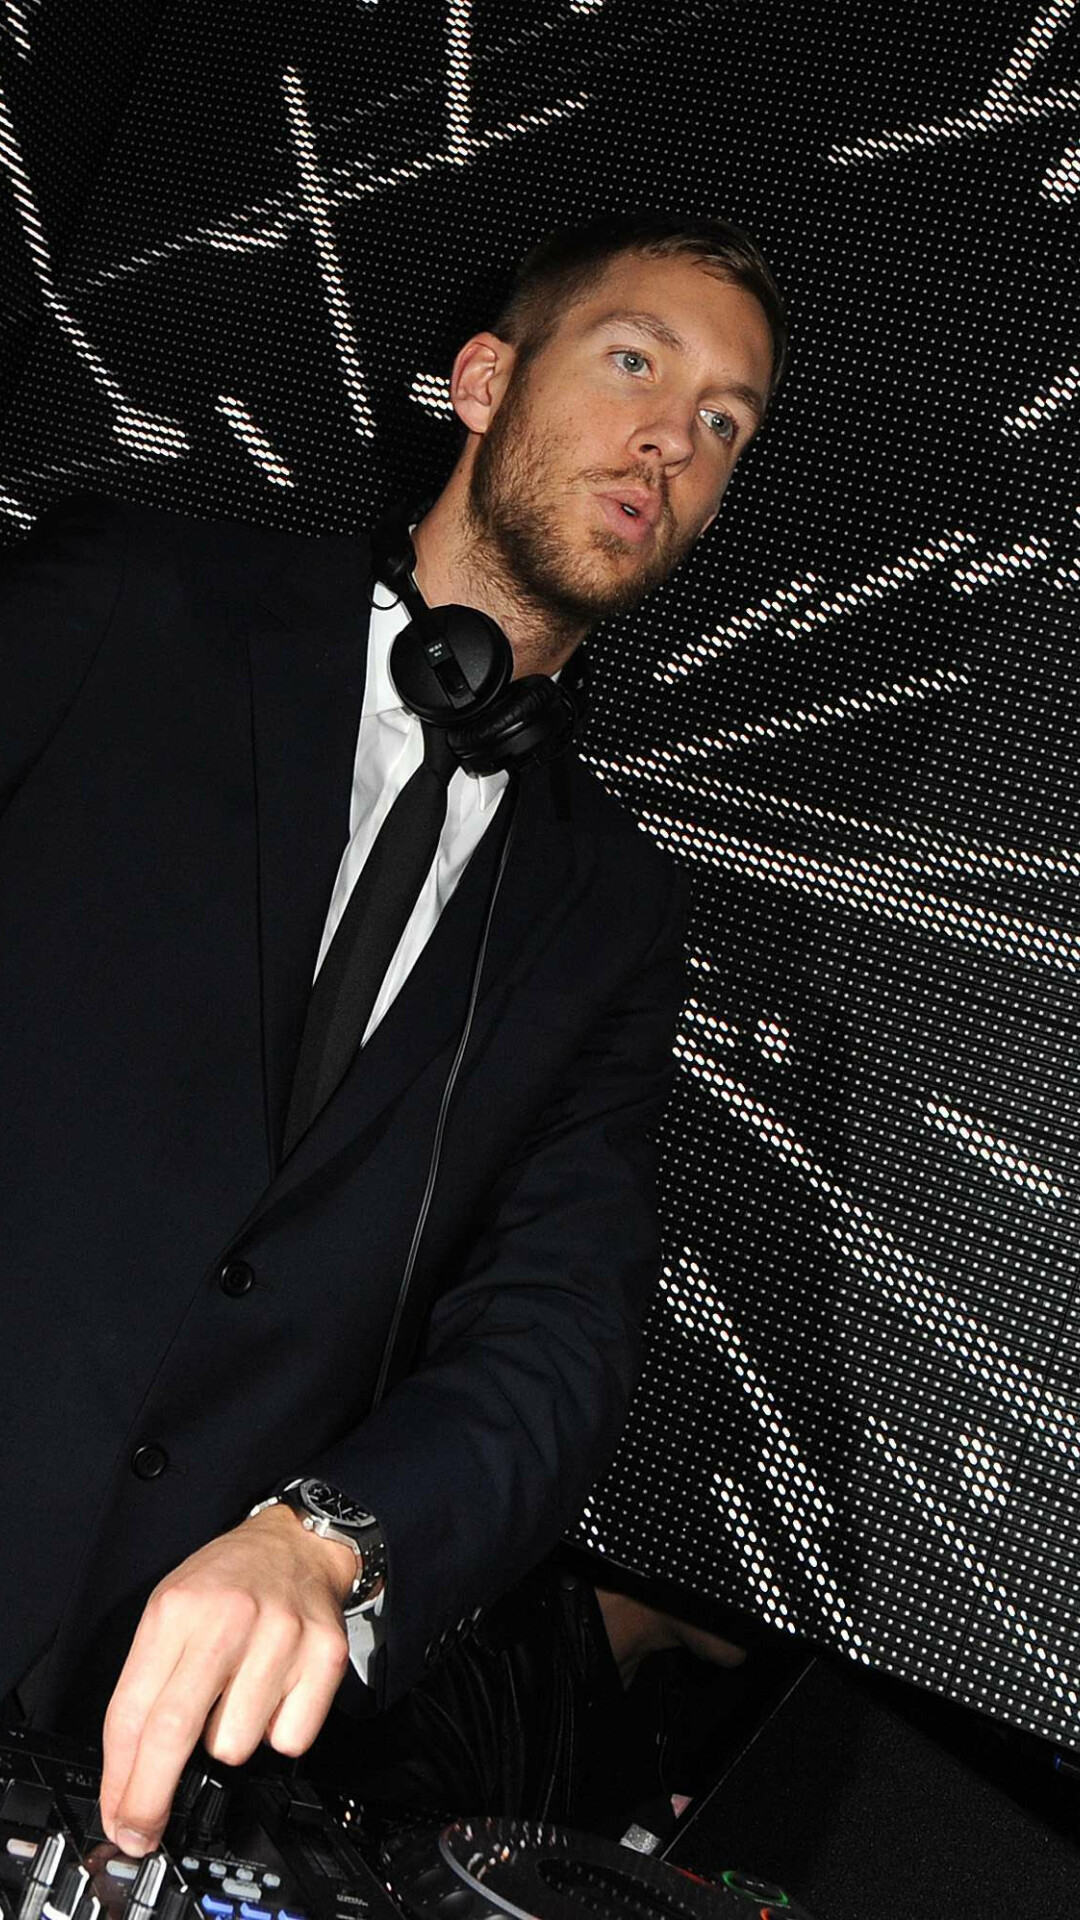 Calvin Harris: "Motion" became the singer's second consecutive number-one album on the Dance/Electronic Albums chart. 1080x1920 Full HD Background.